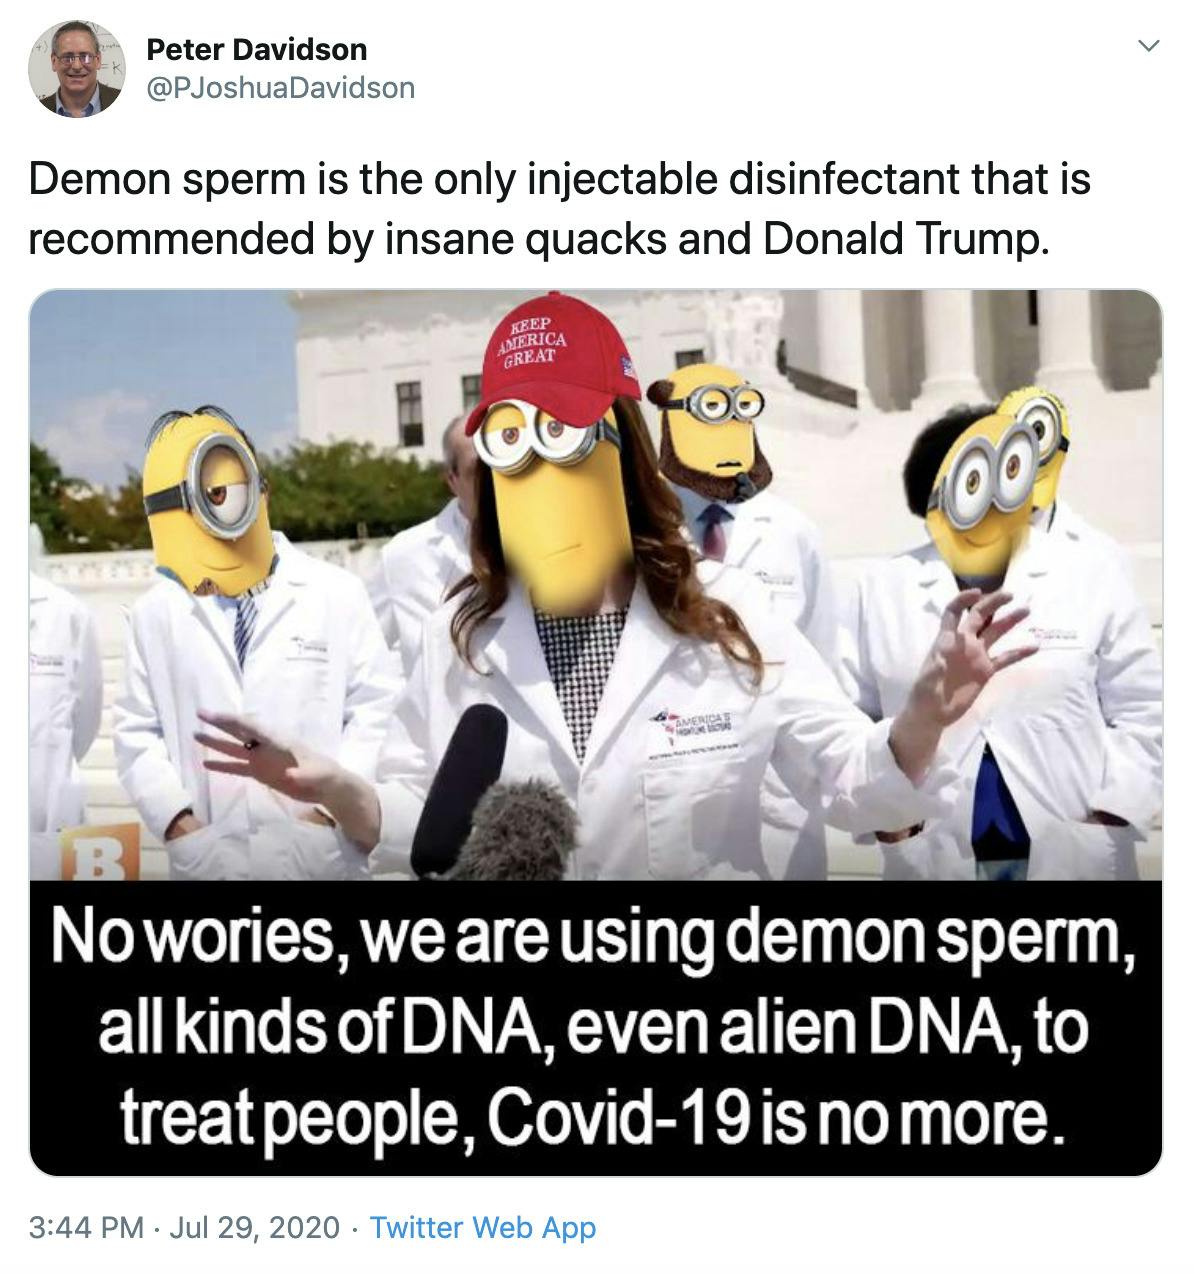 "Demon sperm is the only injectable disinfectant that is recommended by insane quacks and Donald Trump." image of minions in lab coats with text "No worries we are using demon sperm, all kinds of DNA, even alien DNA, to treat people. Covid-19 is no more"